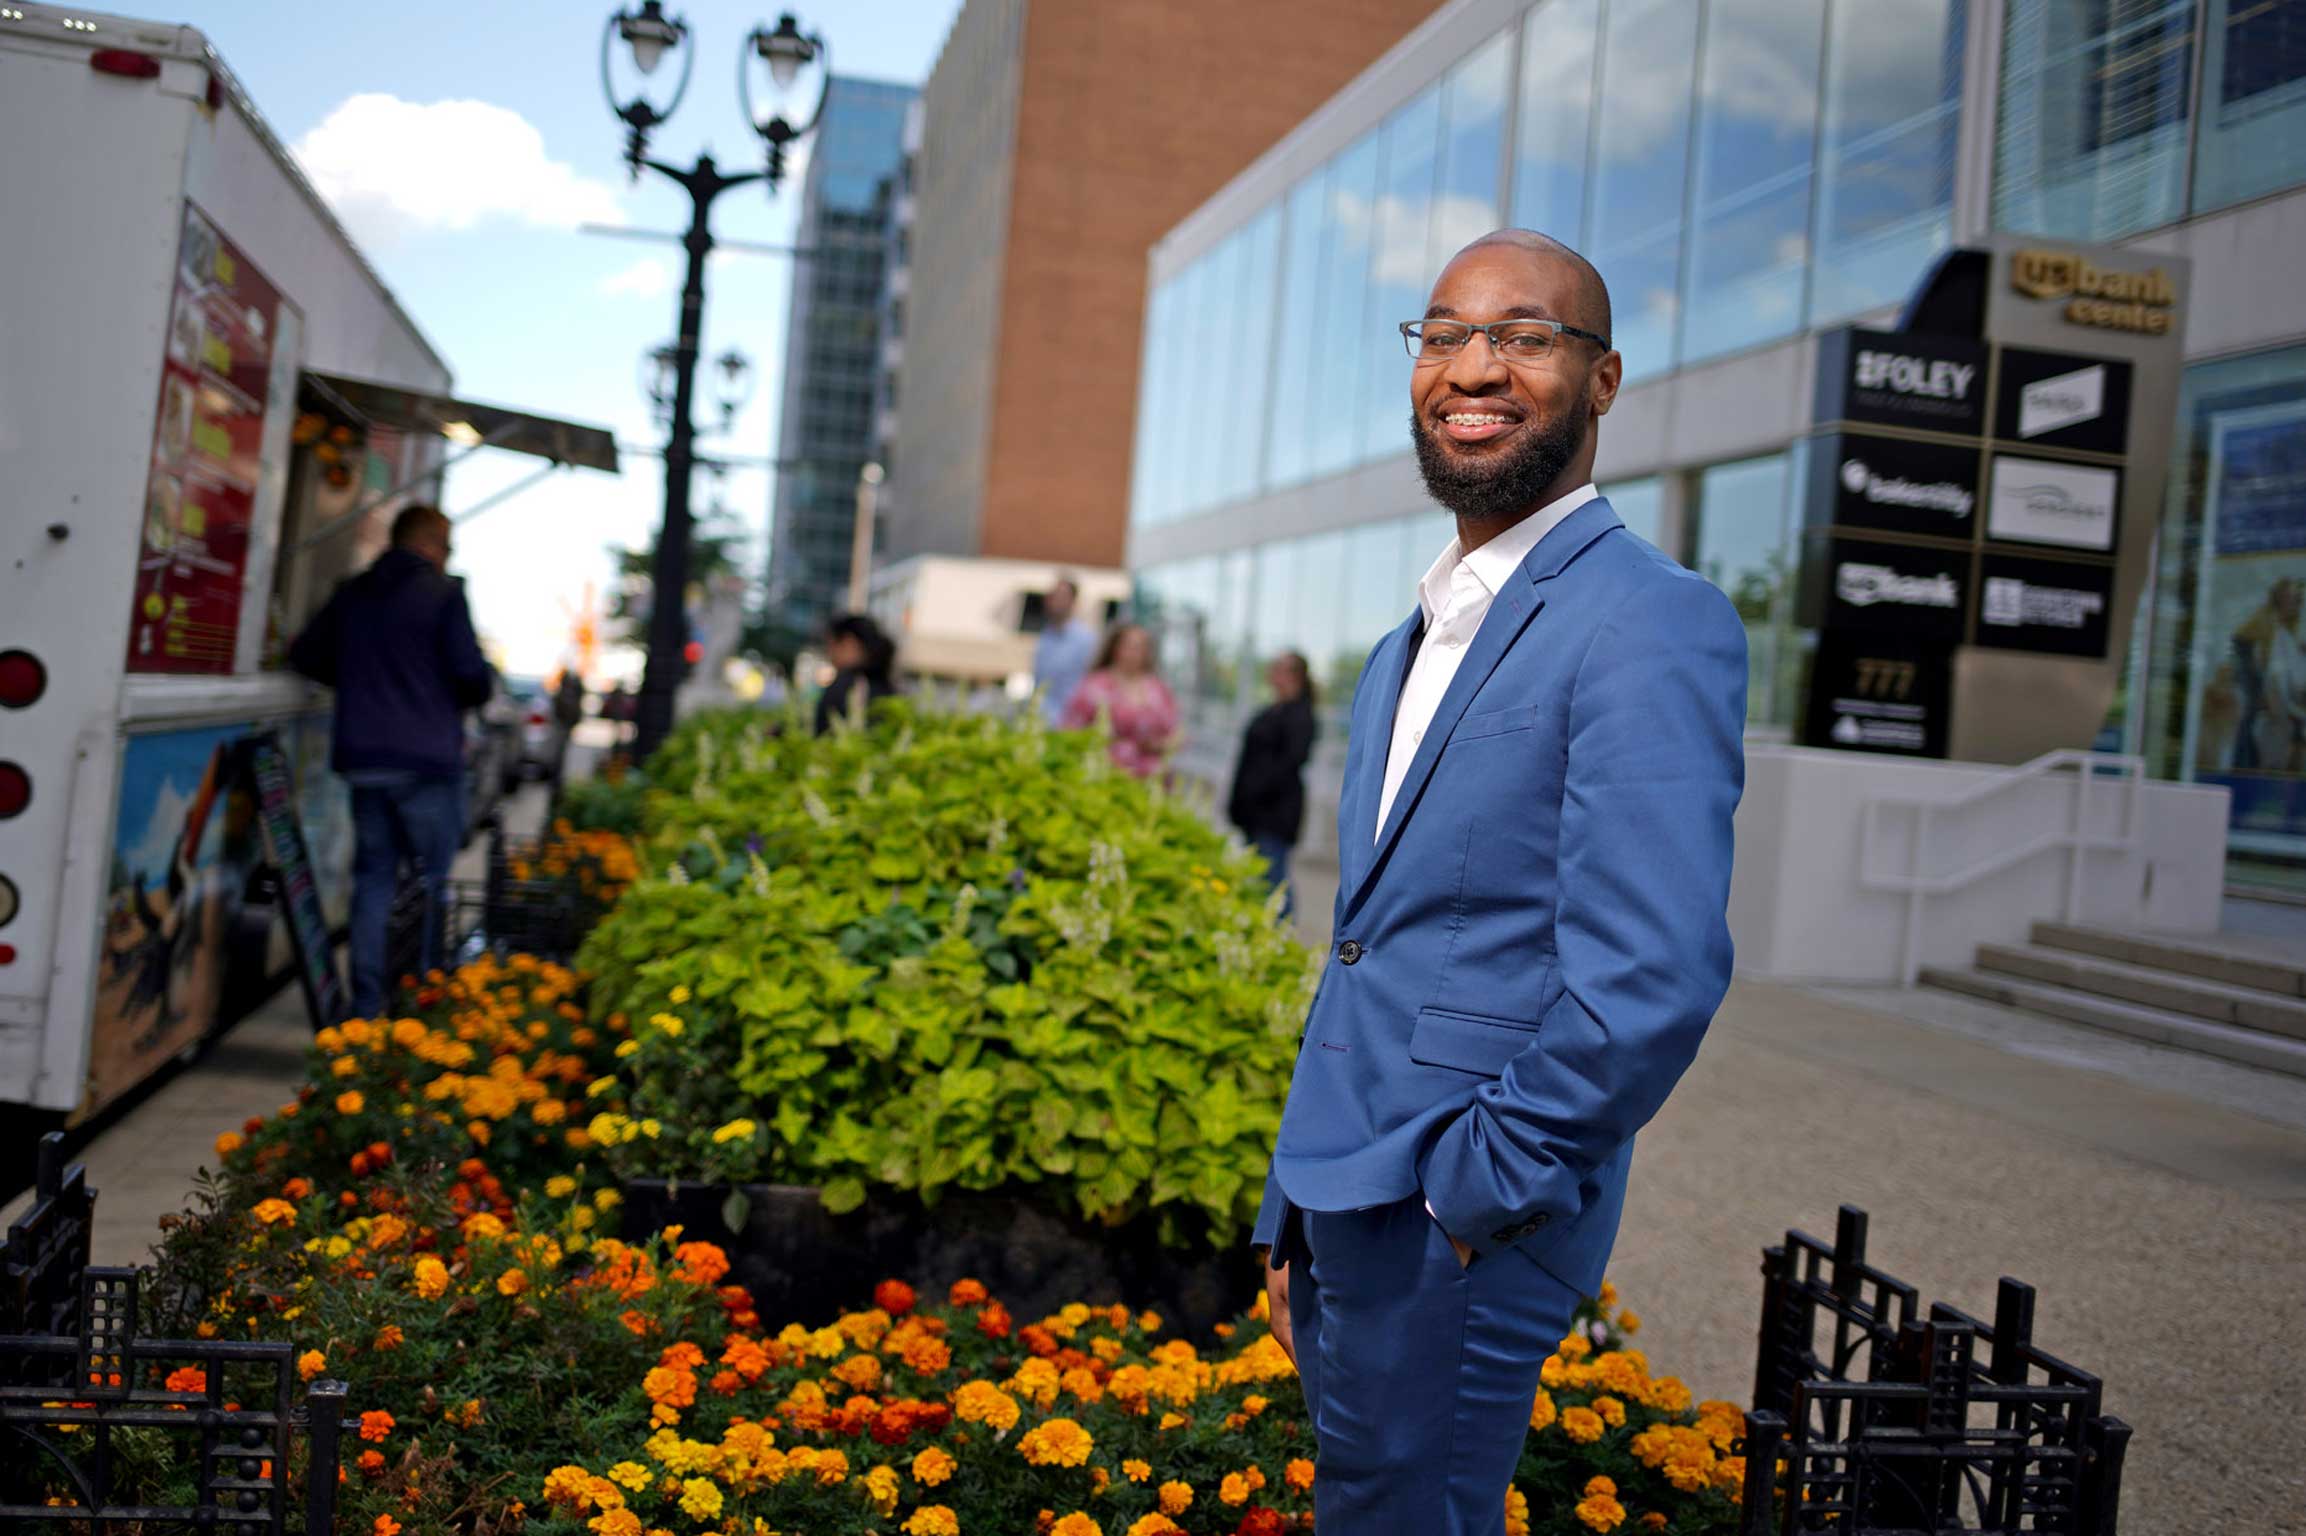 Scholarship recipient Jaylin Durham stands in front of the US Bank building where he works.